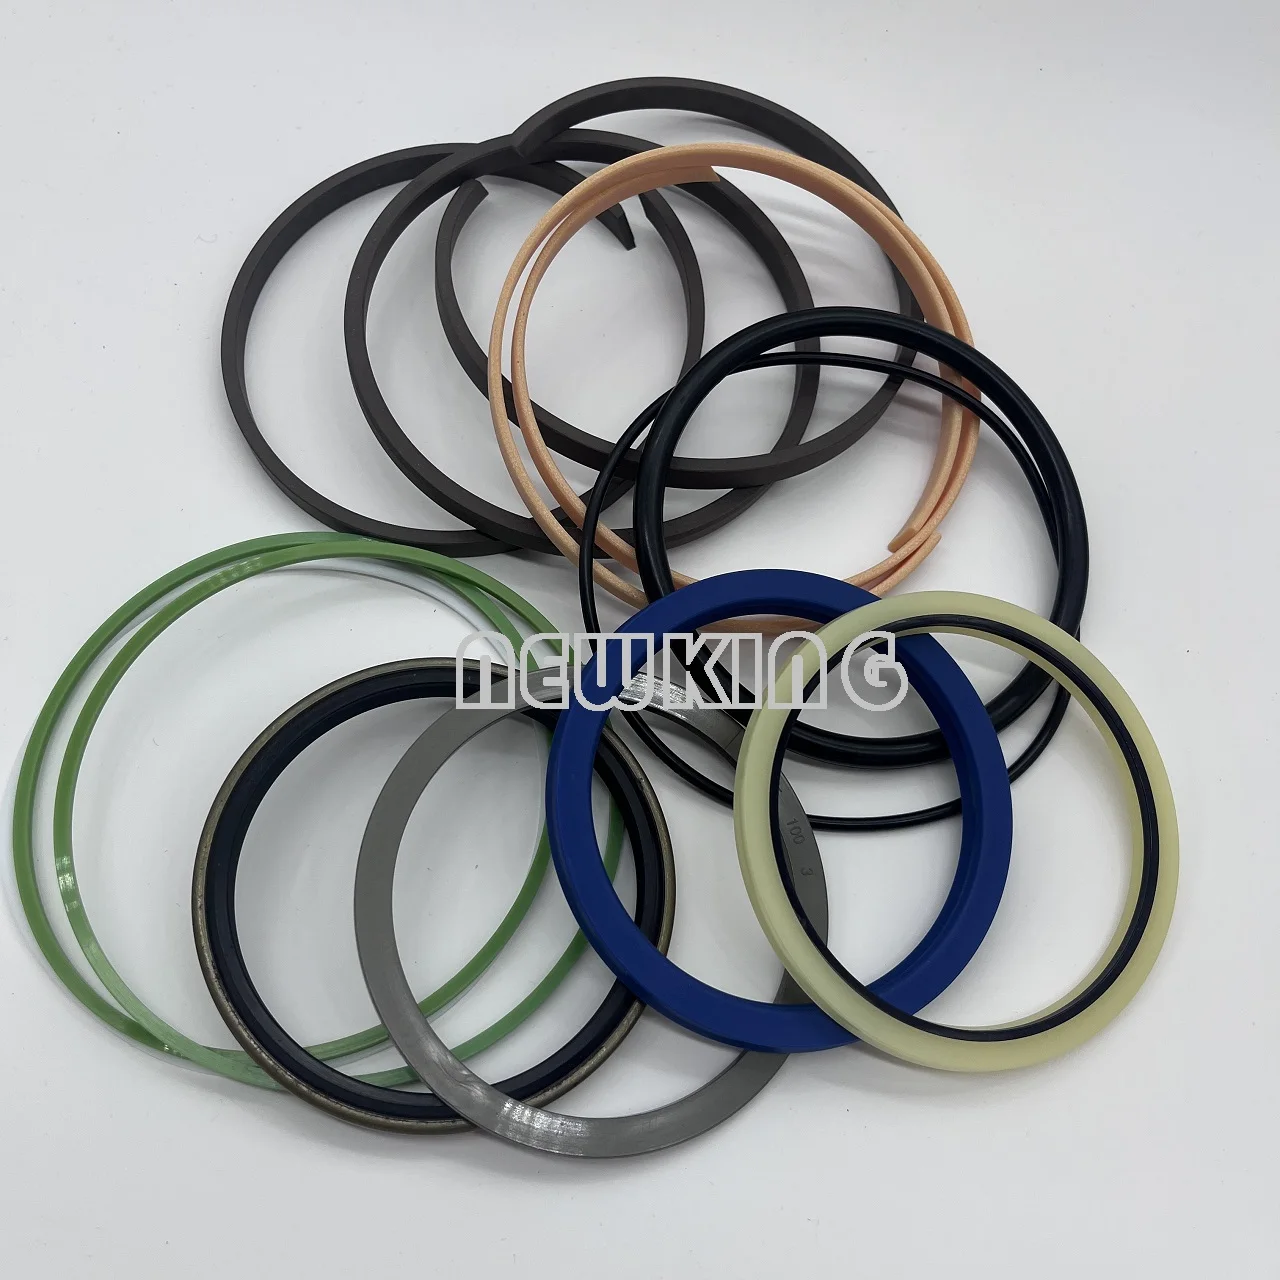 

Excavator E320C E320D Boom Bucket Arm Seal Kit for Cater-pillar Hydraulic Cylinder Repair Kit Oil Seal 247-8868 247-8878